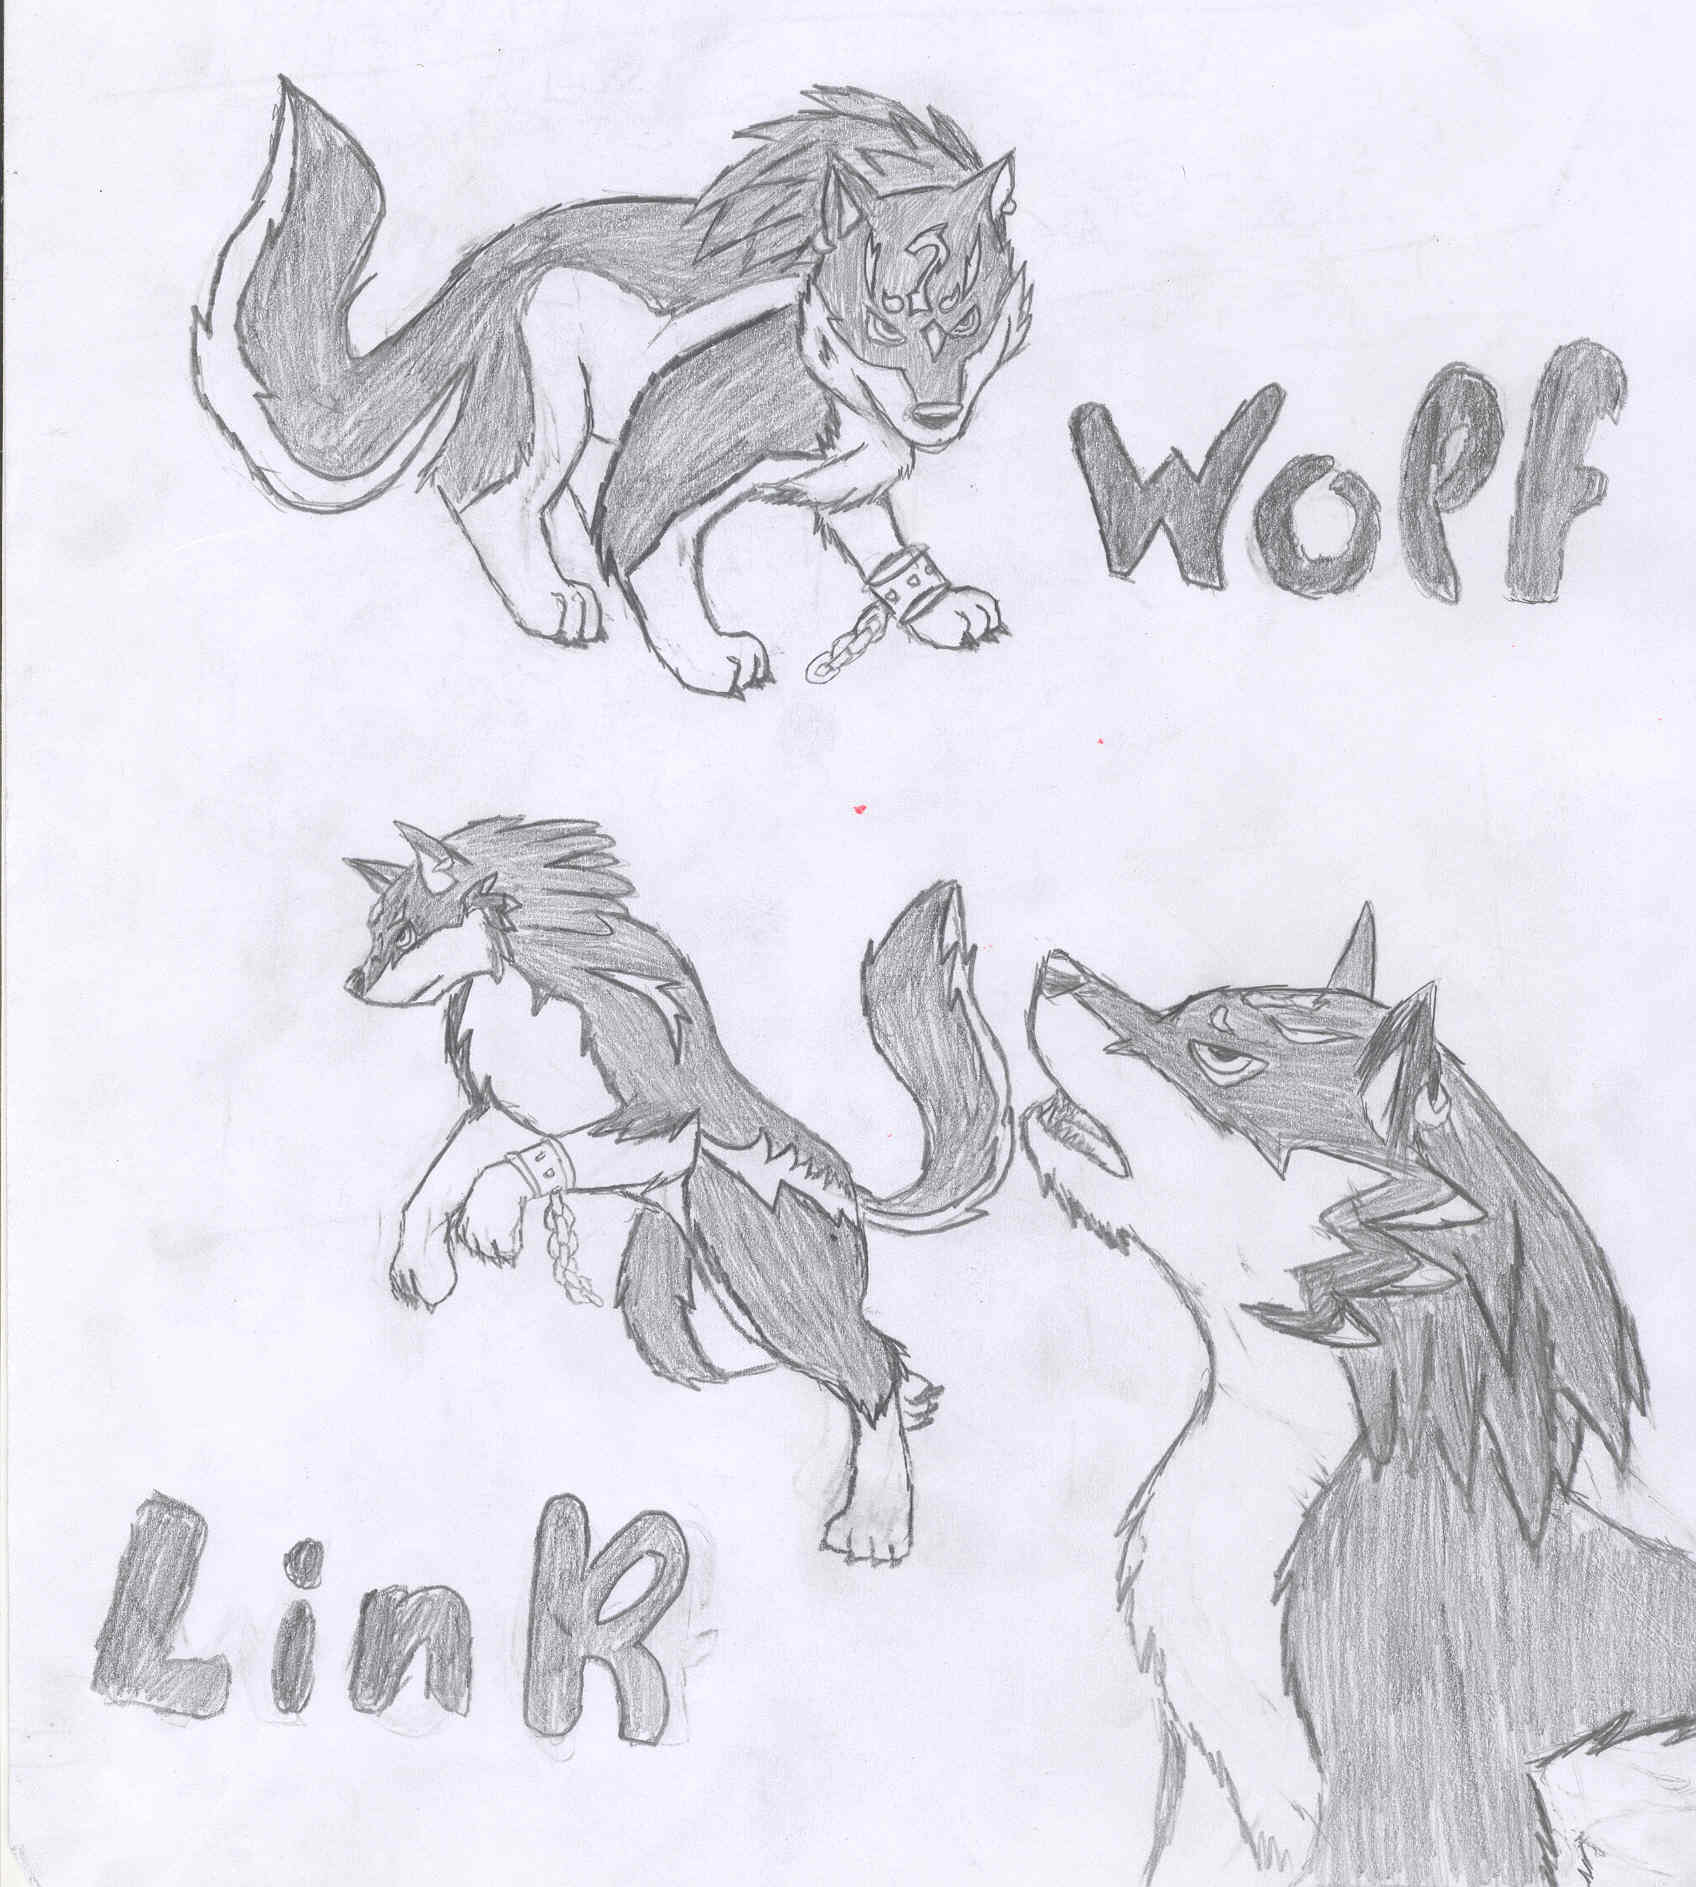 Wulf Link by luv_ty_like_sly